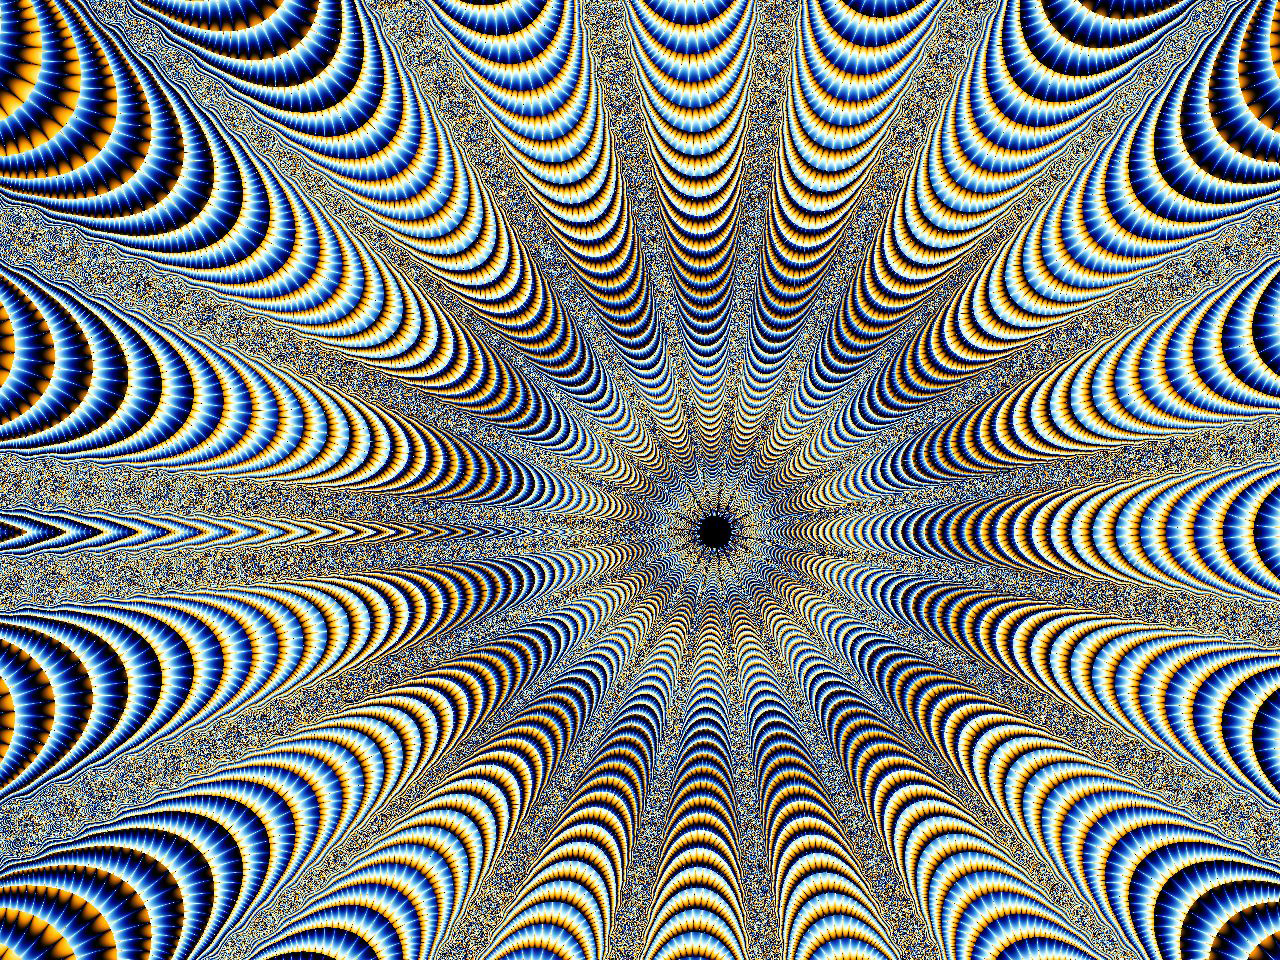 paper illusions wallpaper,blue,pattern,symmetry,psychedelic art,design